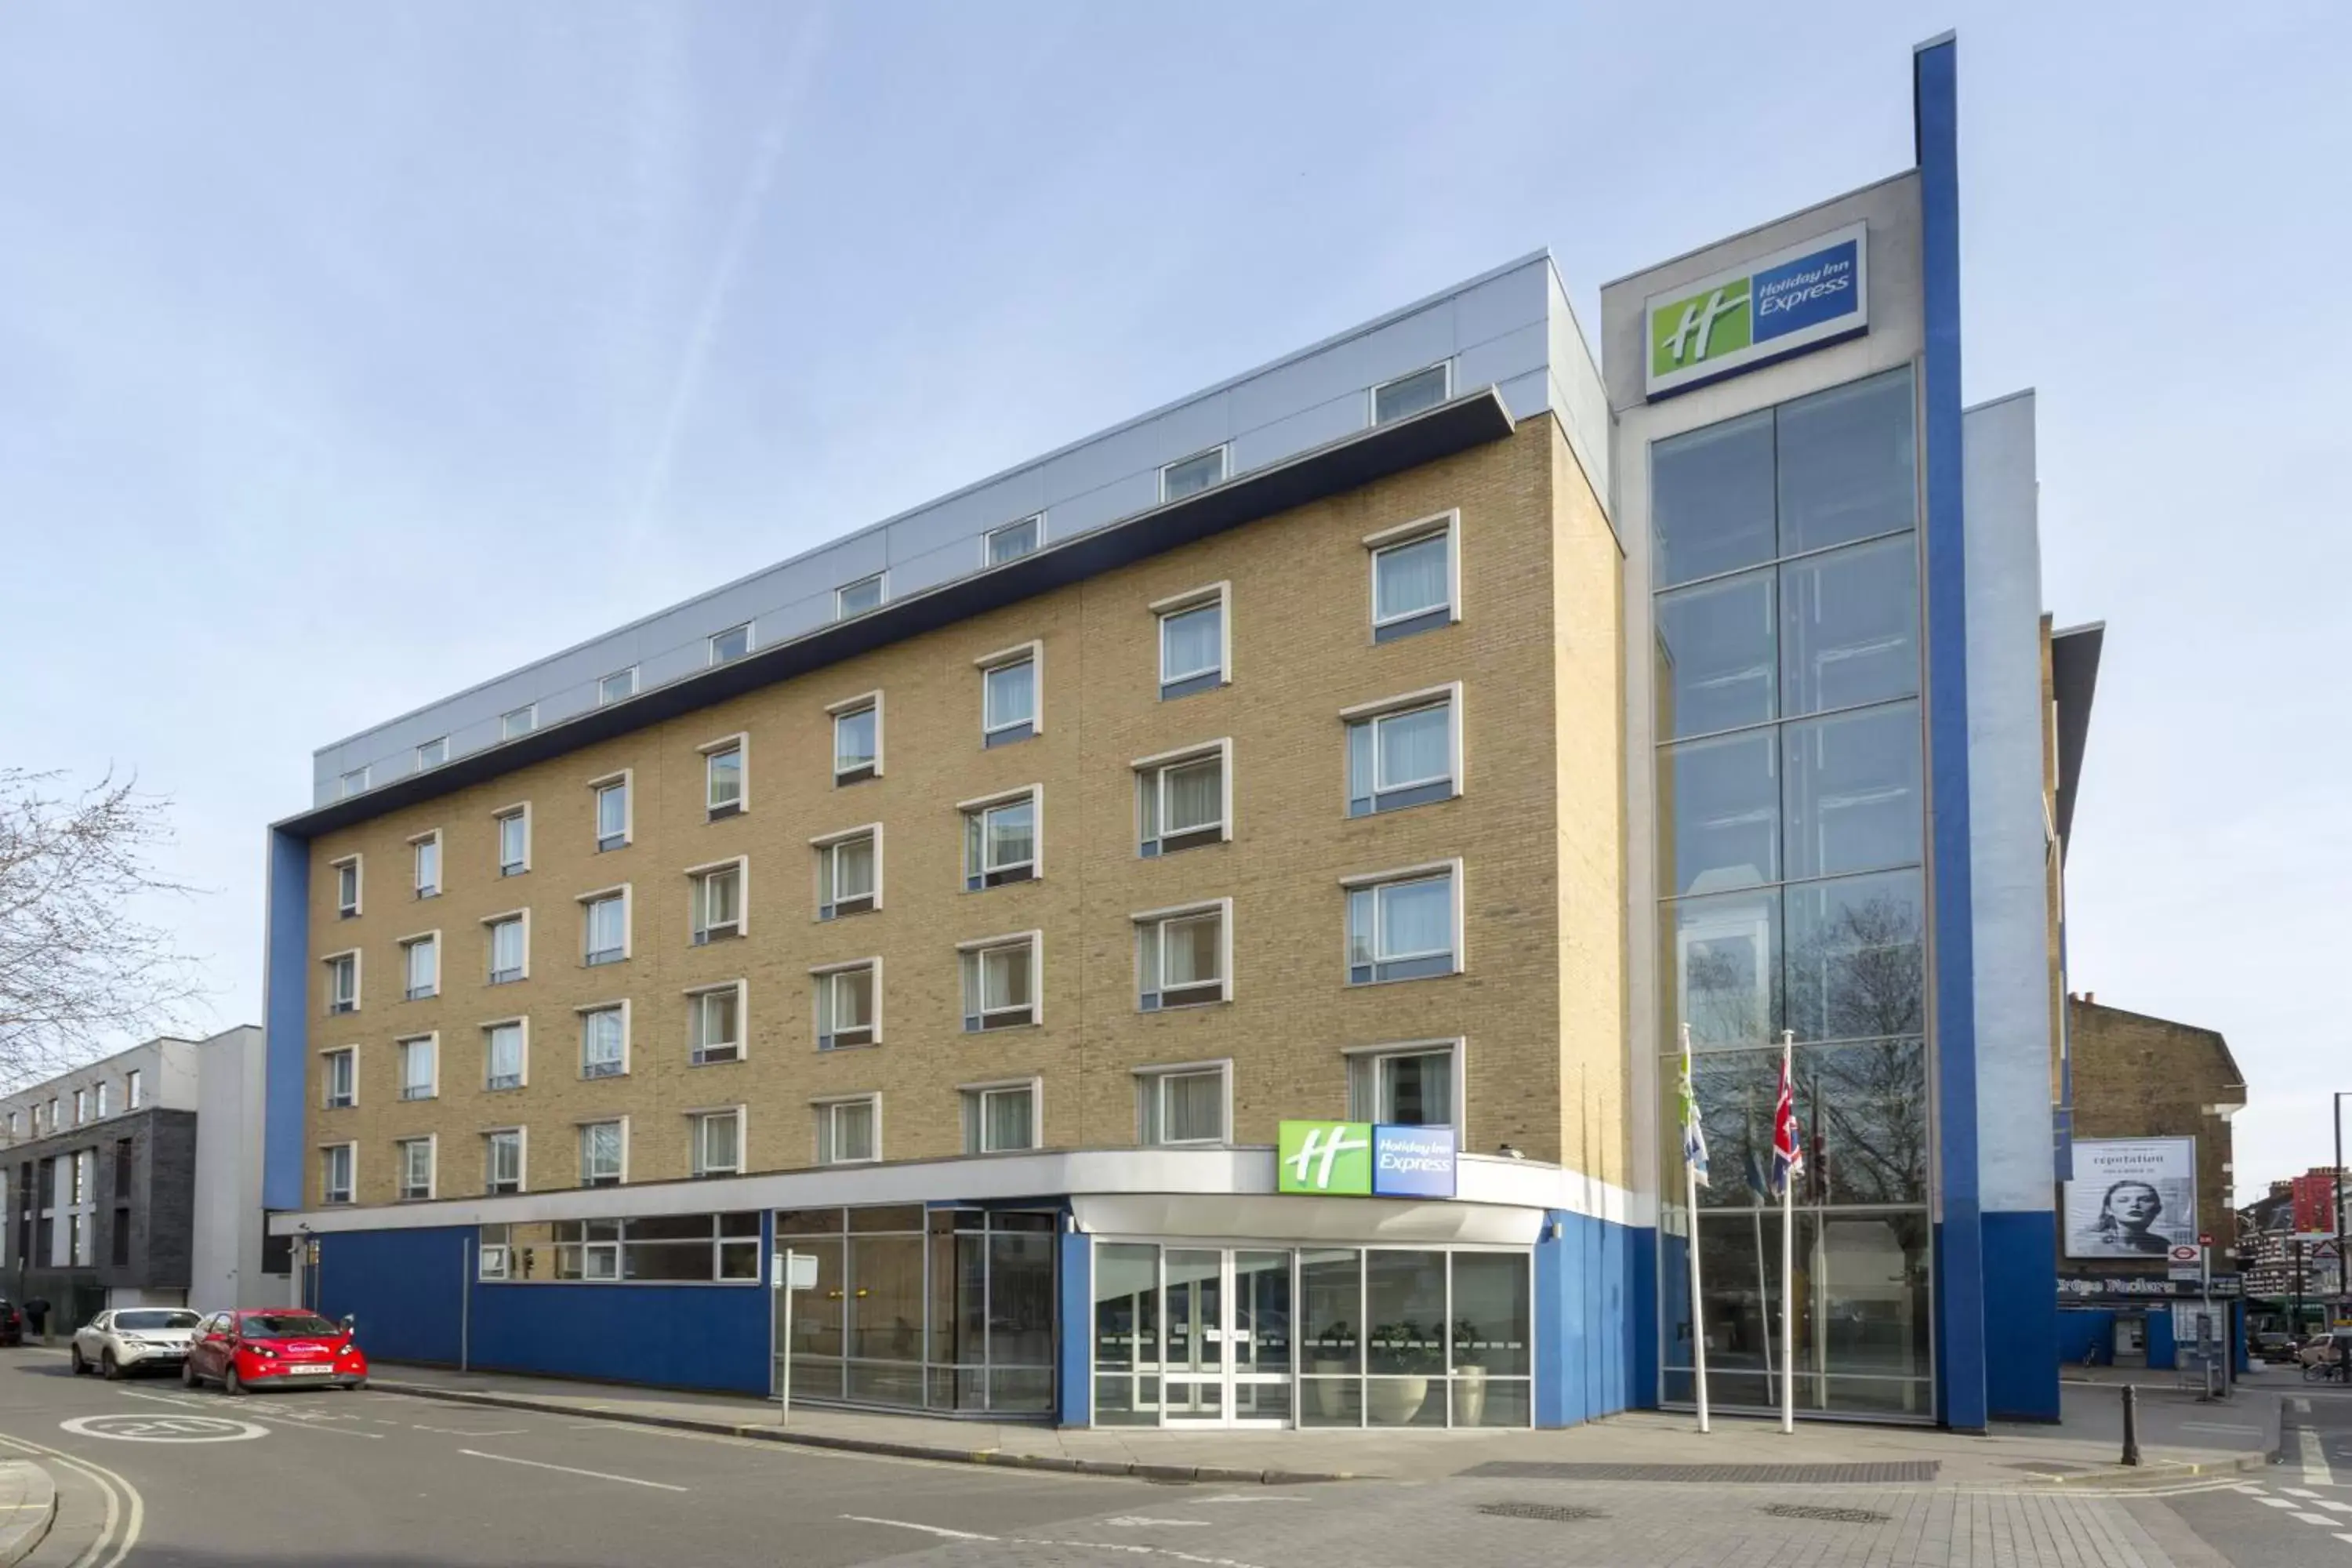 Property Building in Holiday Inn Express Earls Court, an IHG Hotel